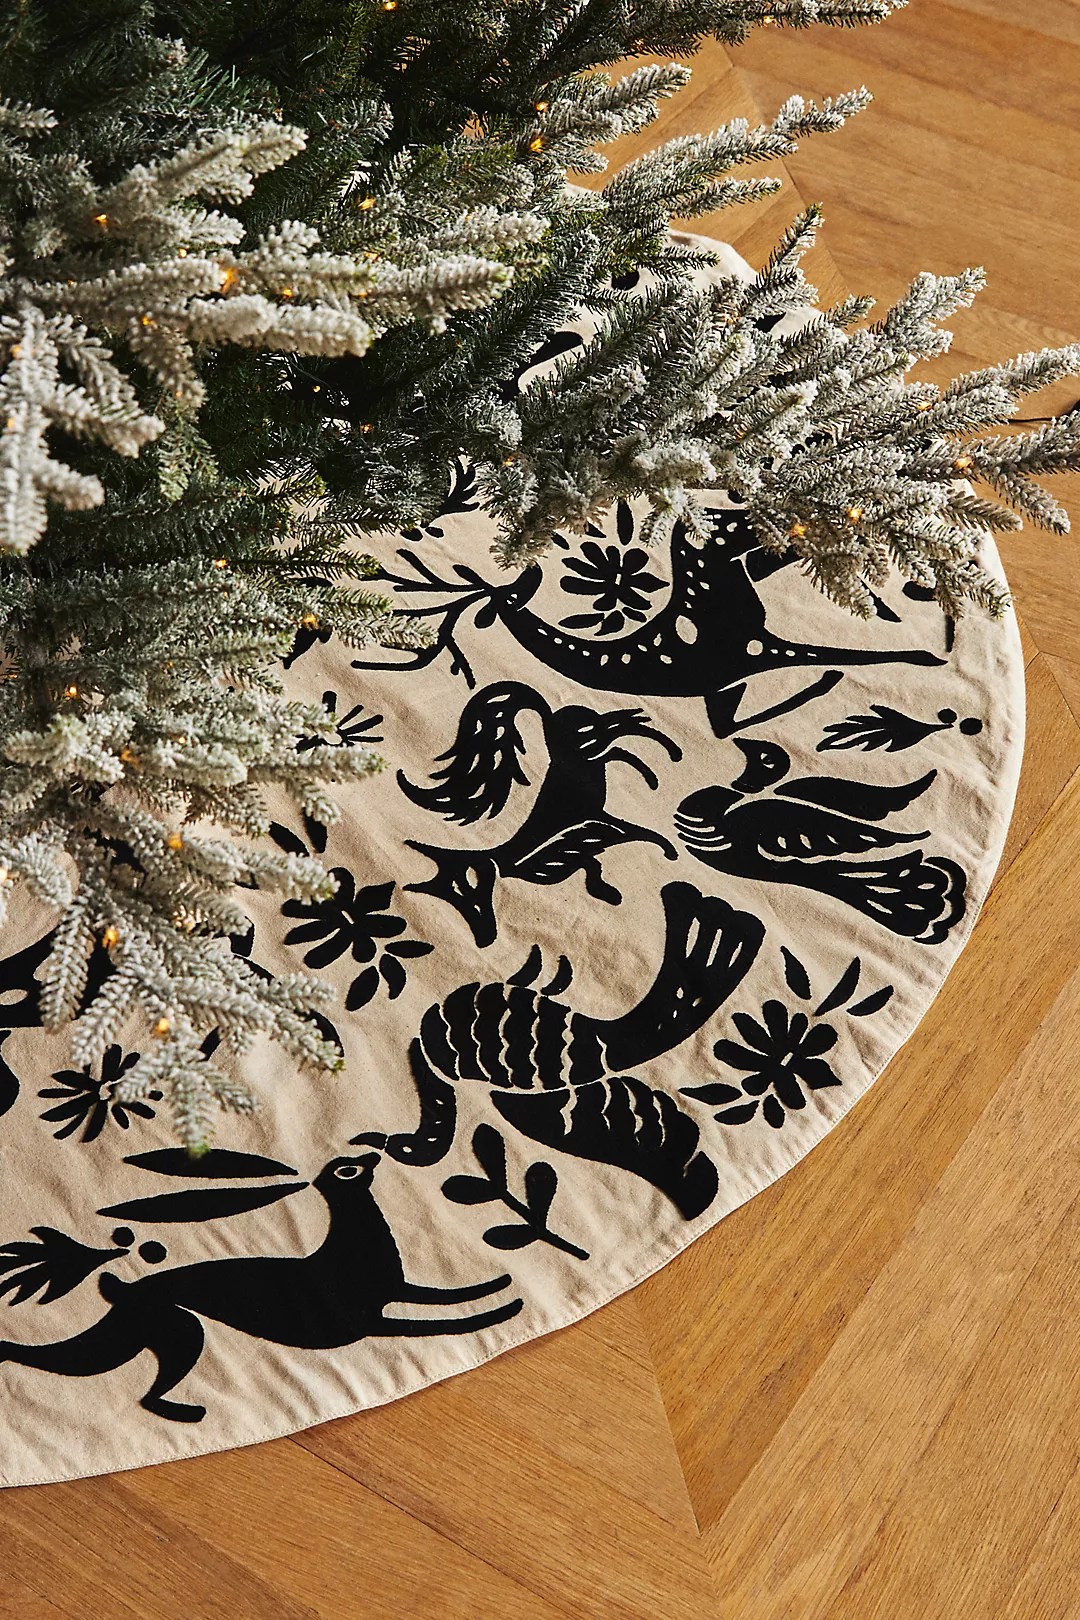 embroidered tree skirt from the anthropologie black friday sale